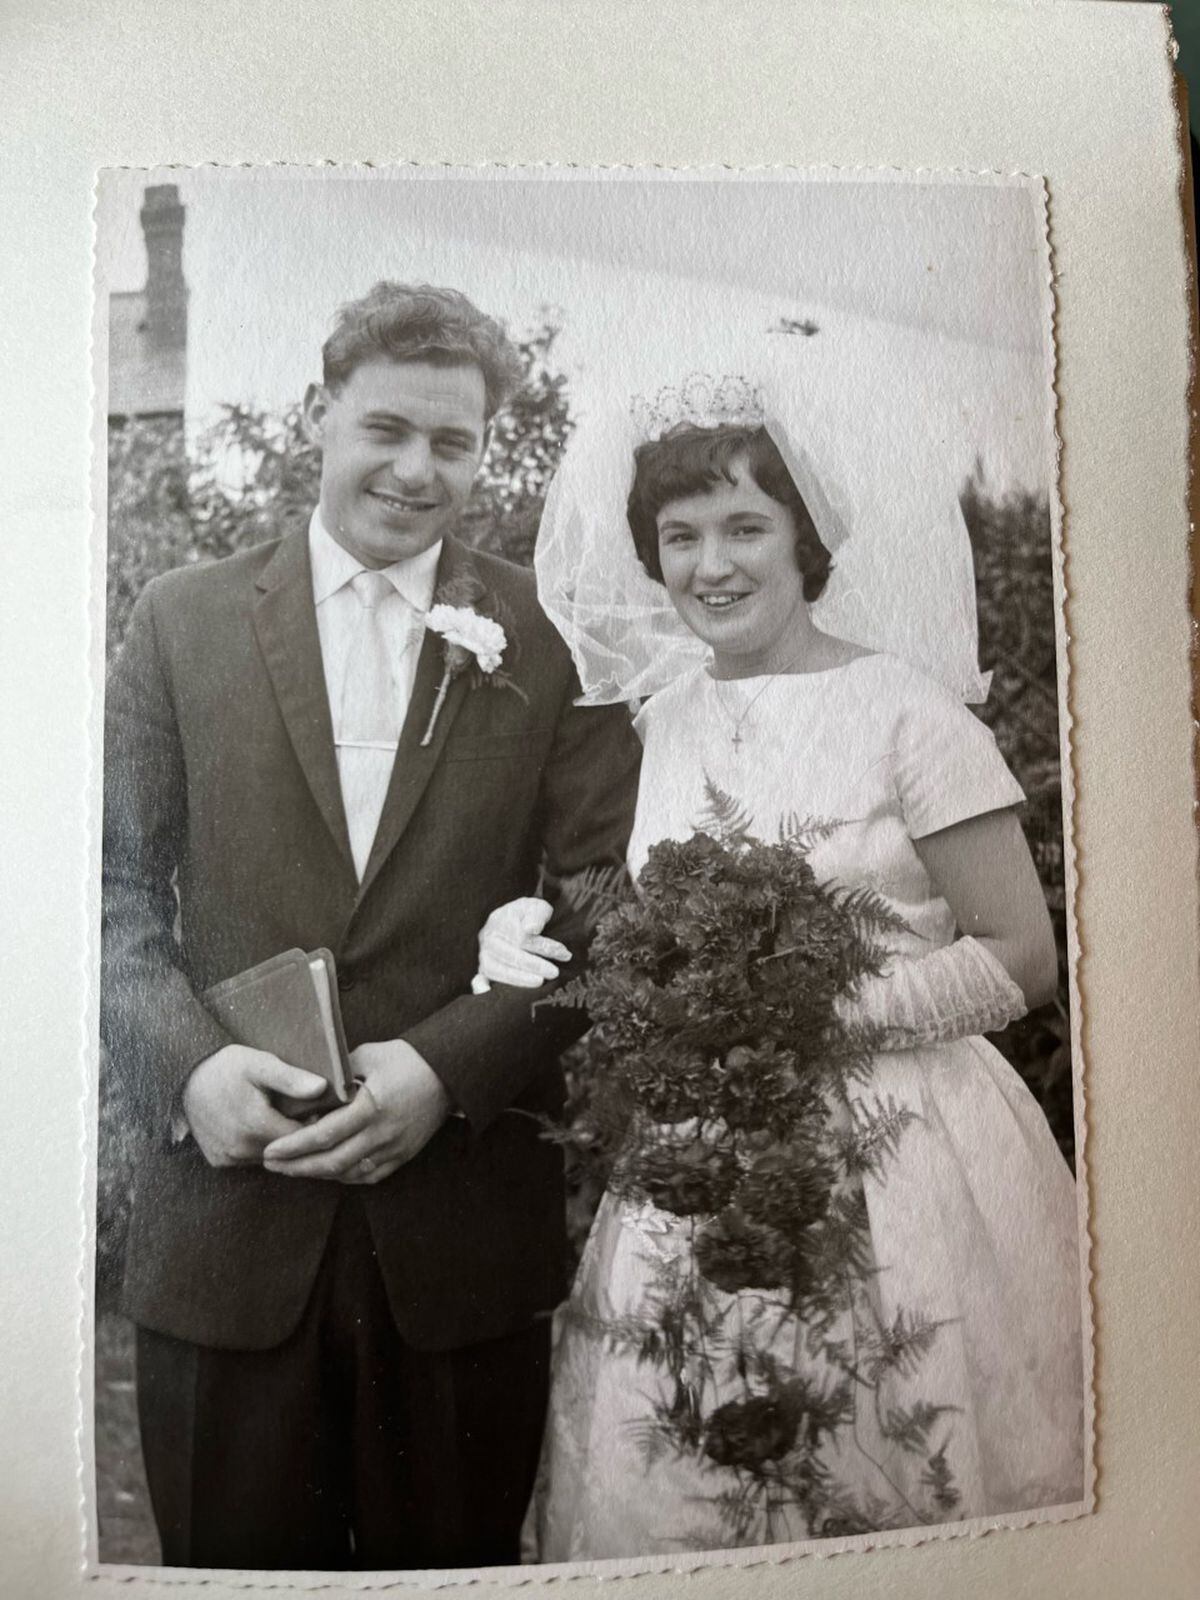 Keith and Binnie Goodman on their wedding day in 1962